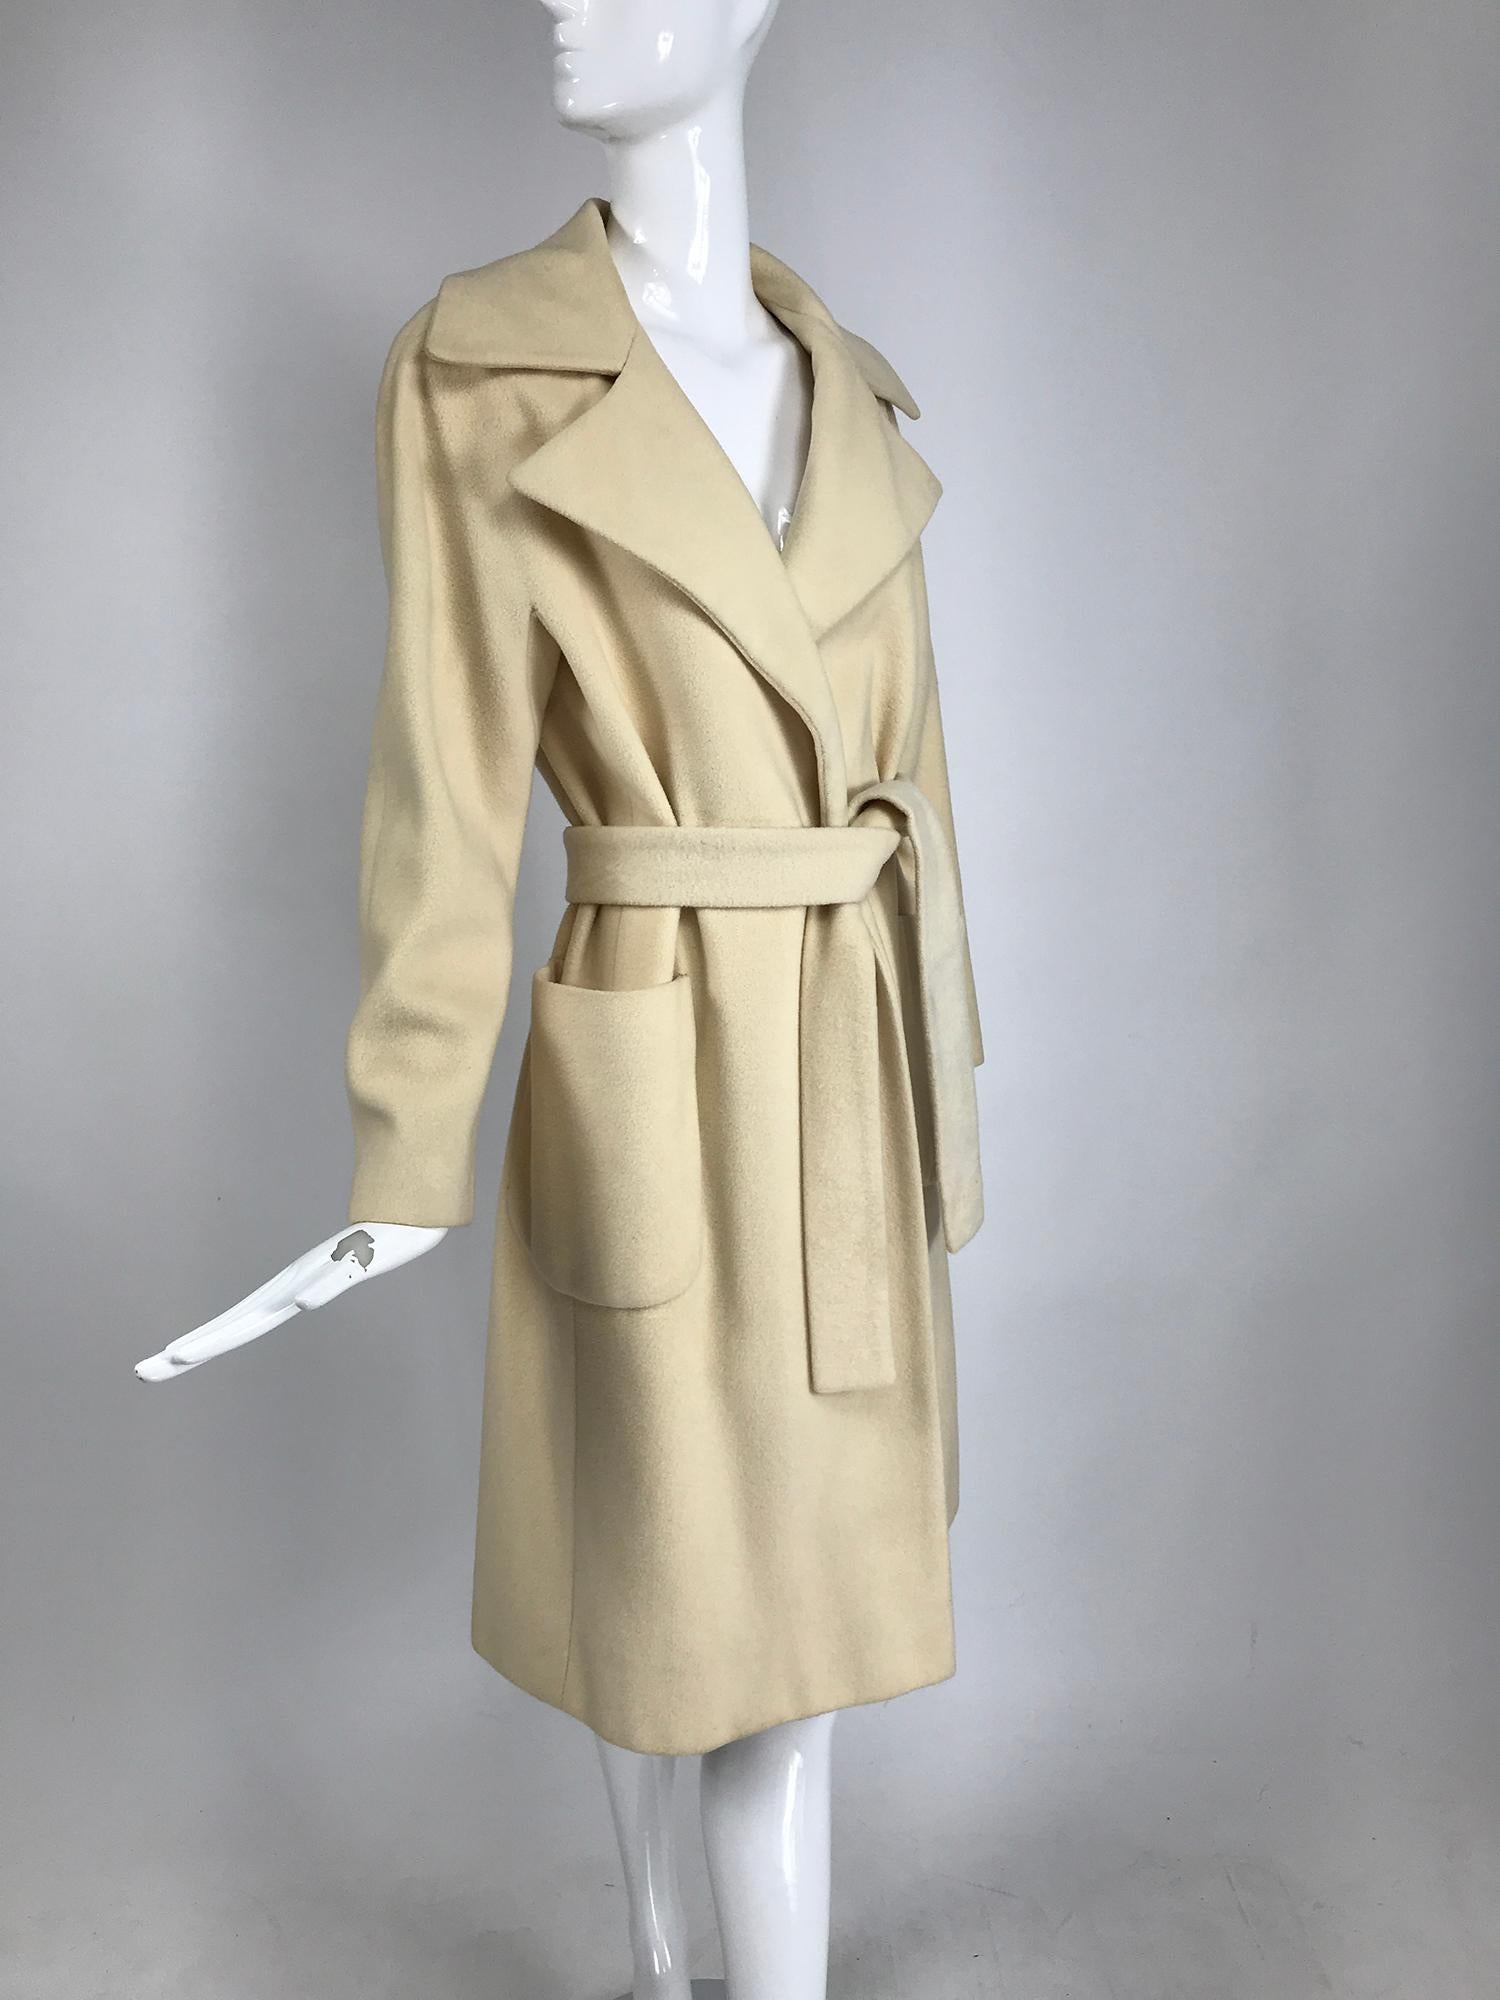 Cream 100% cashmere wrap coat with patch pockets from the 1970s. A beautiful coat with some high end sewing details, the coat back and sleeve backs are cut from one piece of fabric, the sleeves are seamed along the outside center, the sleeve fronts